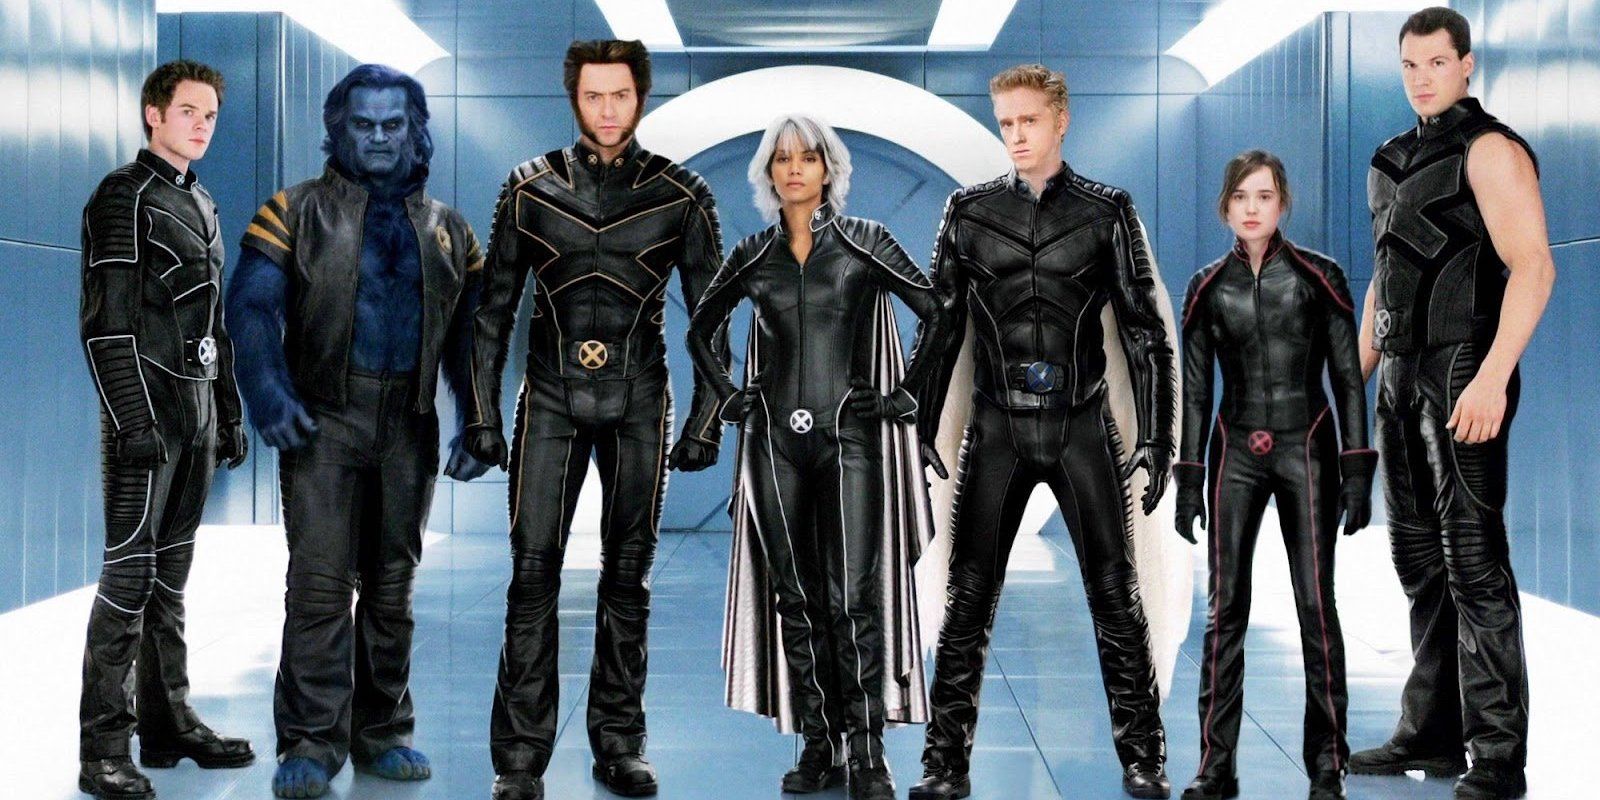 6 Reasons Why XMen The Last Stand Isn’t As Bad As People Say It Is (& 4 Reasons It Is)